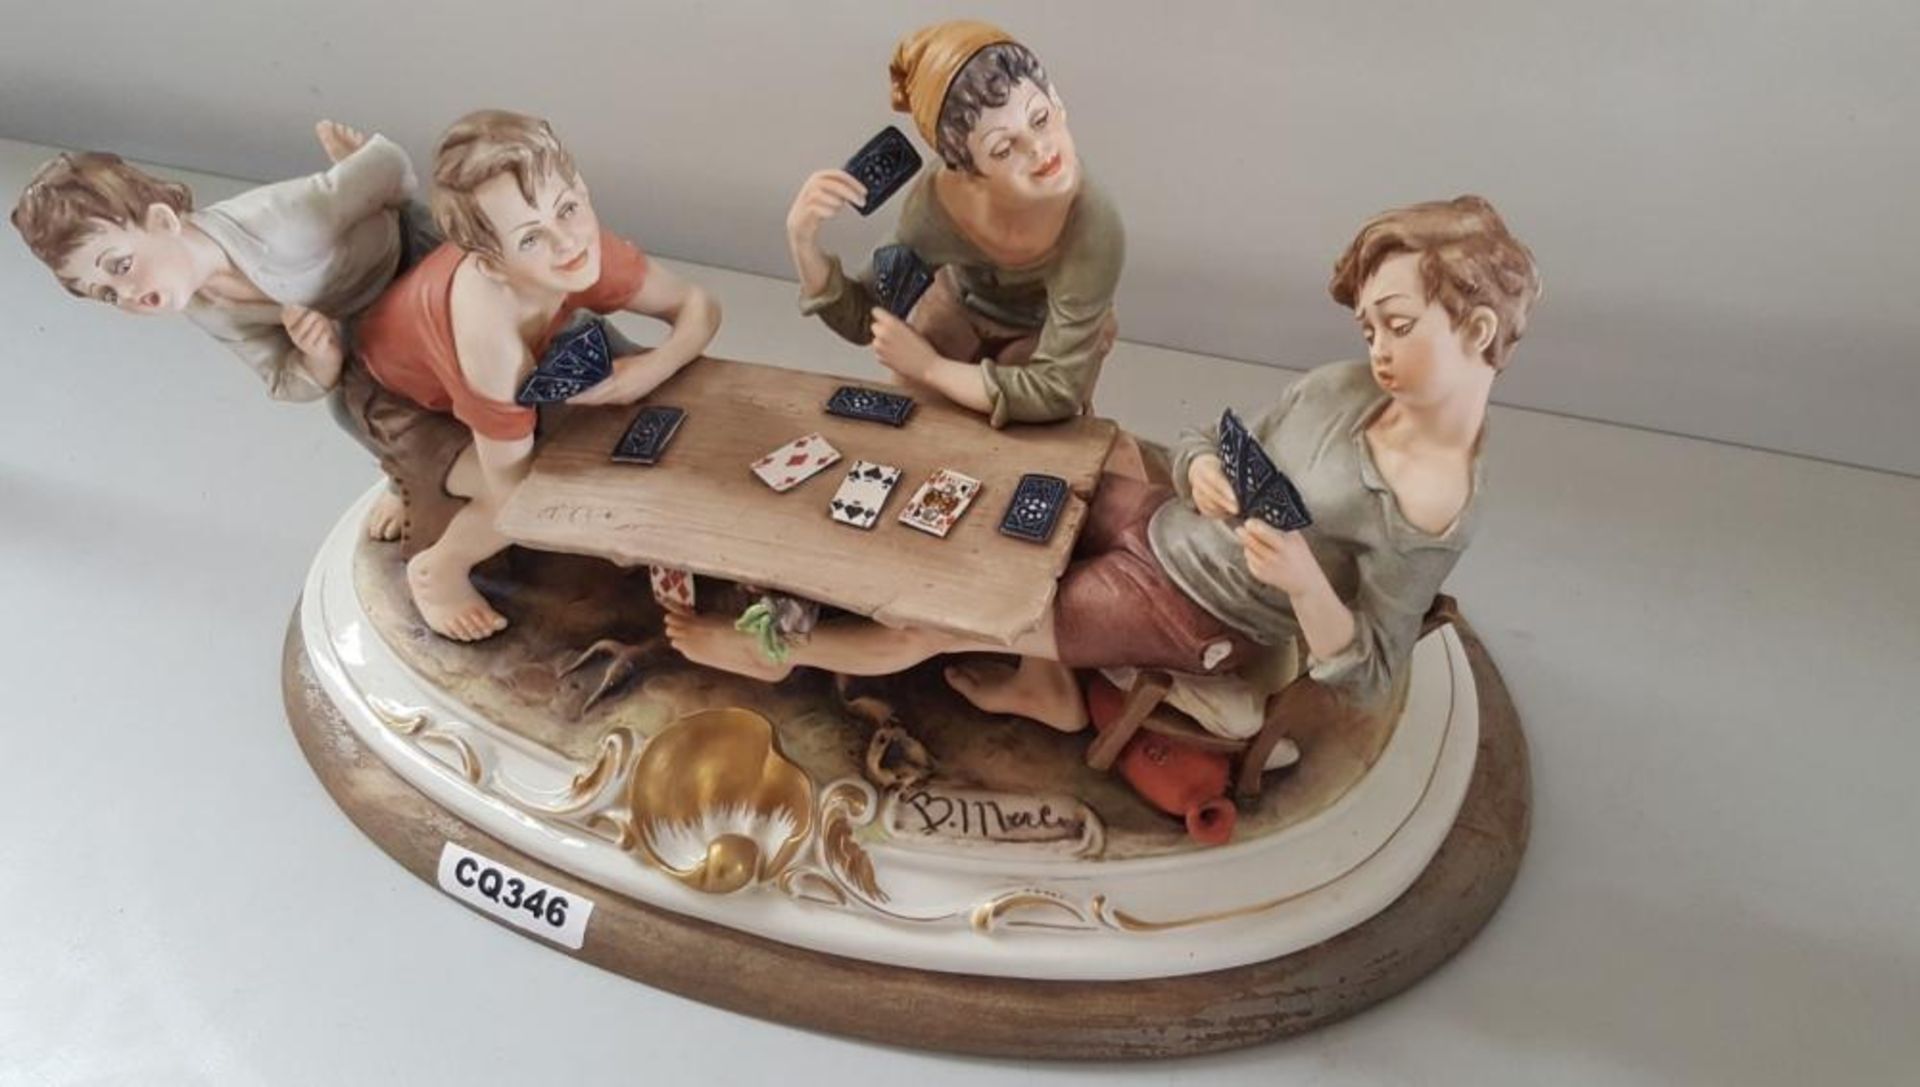 1 x VINTAGE ITALIAN CAPODIMONTE PORCELAIN GROUP "THE CHEATS" BY BRUNO MERLI - Ref CQ346 E - Image 3 of 4